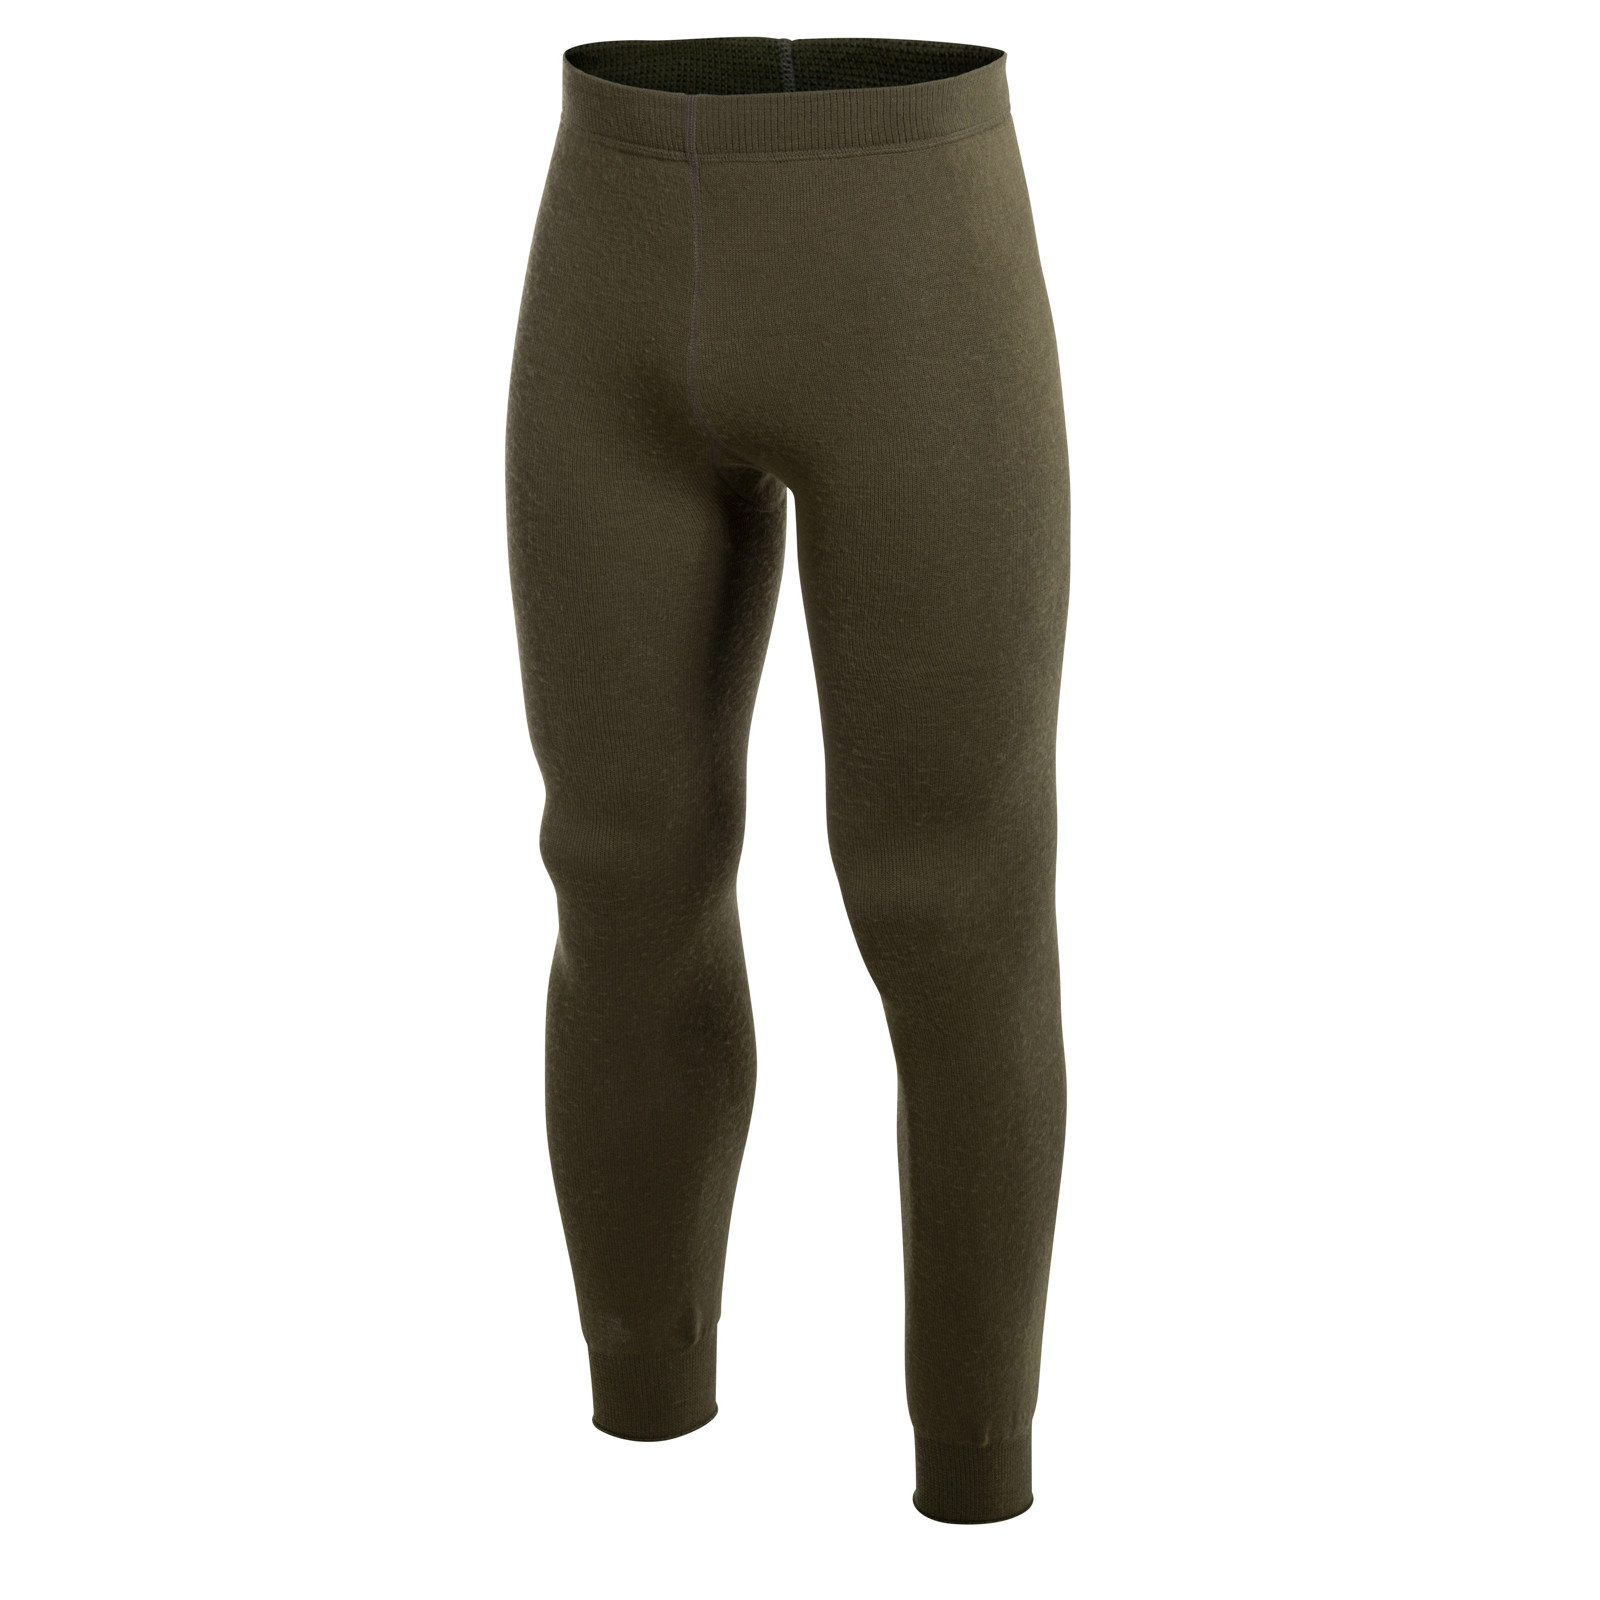 Woolpower Long Johns 200: Thermal long tights. Contains 60% merino wool.